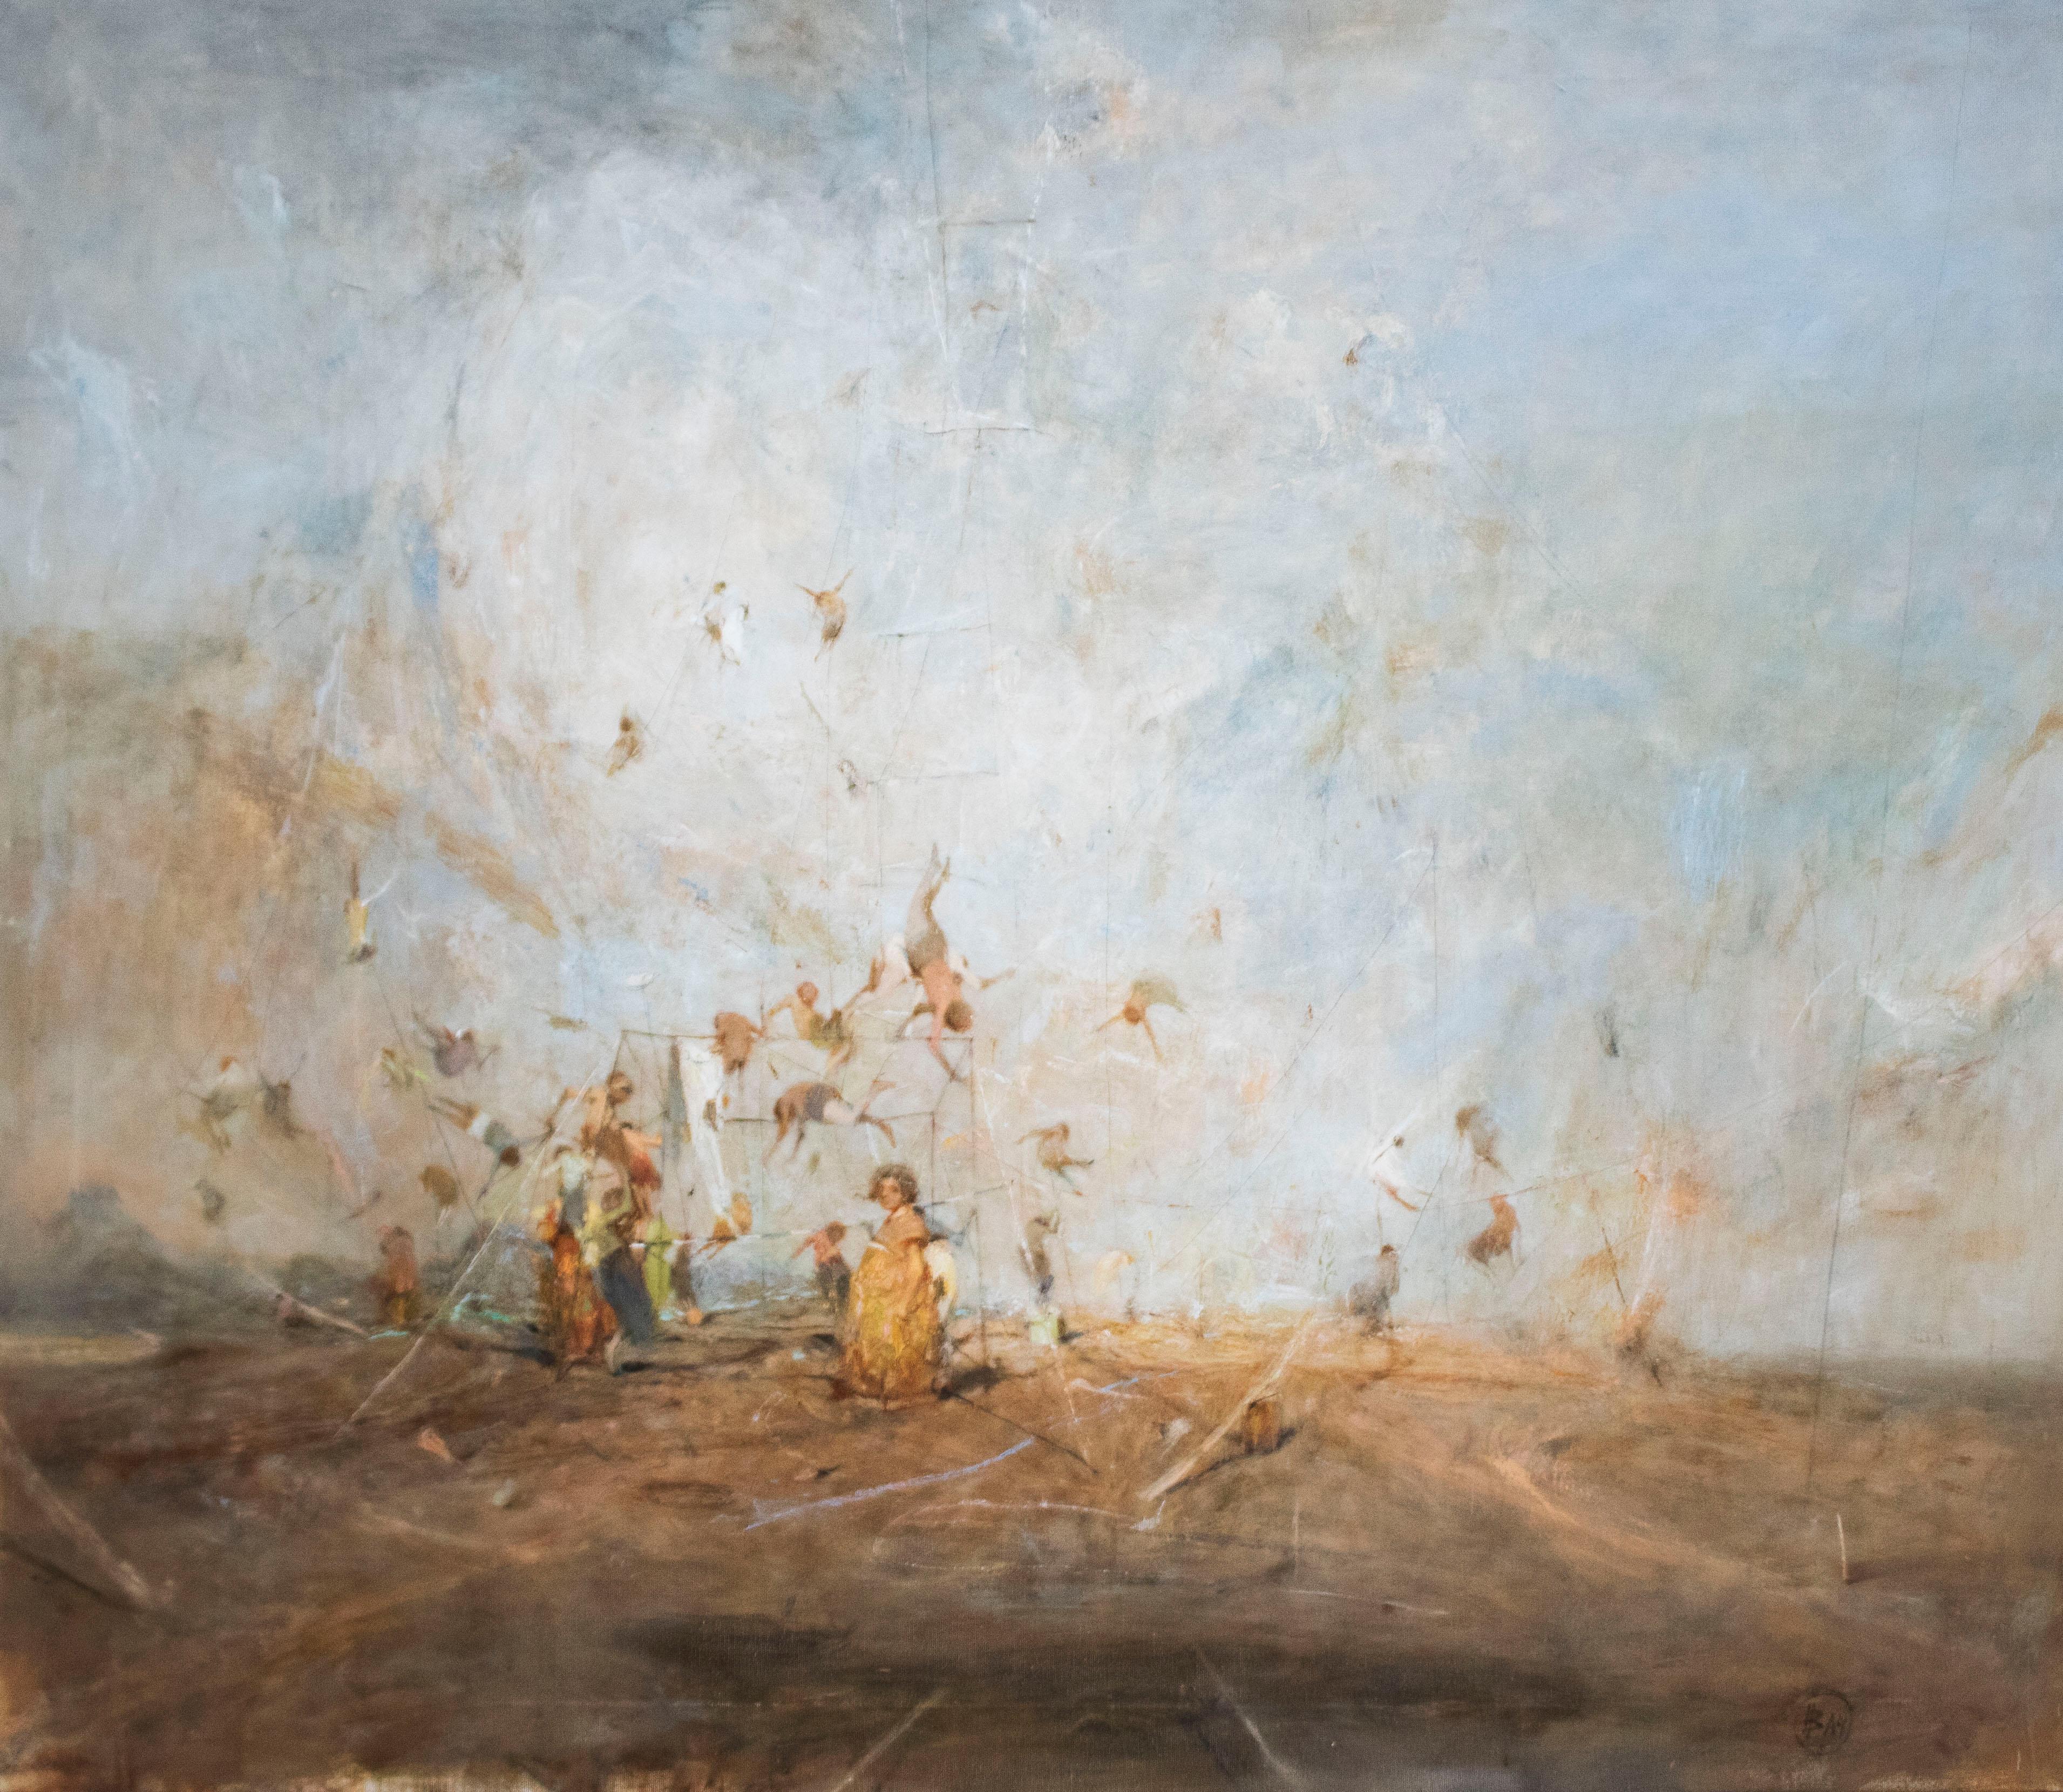 Vachagan Narazyan Landscape Painting - VACHAGAN NARAZYAN, Between Heaven and Earth series, 33in x 43in, oil on canvas